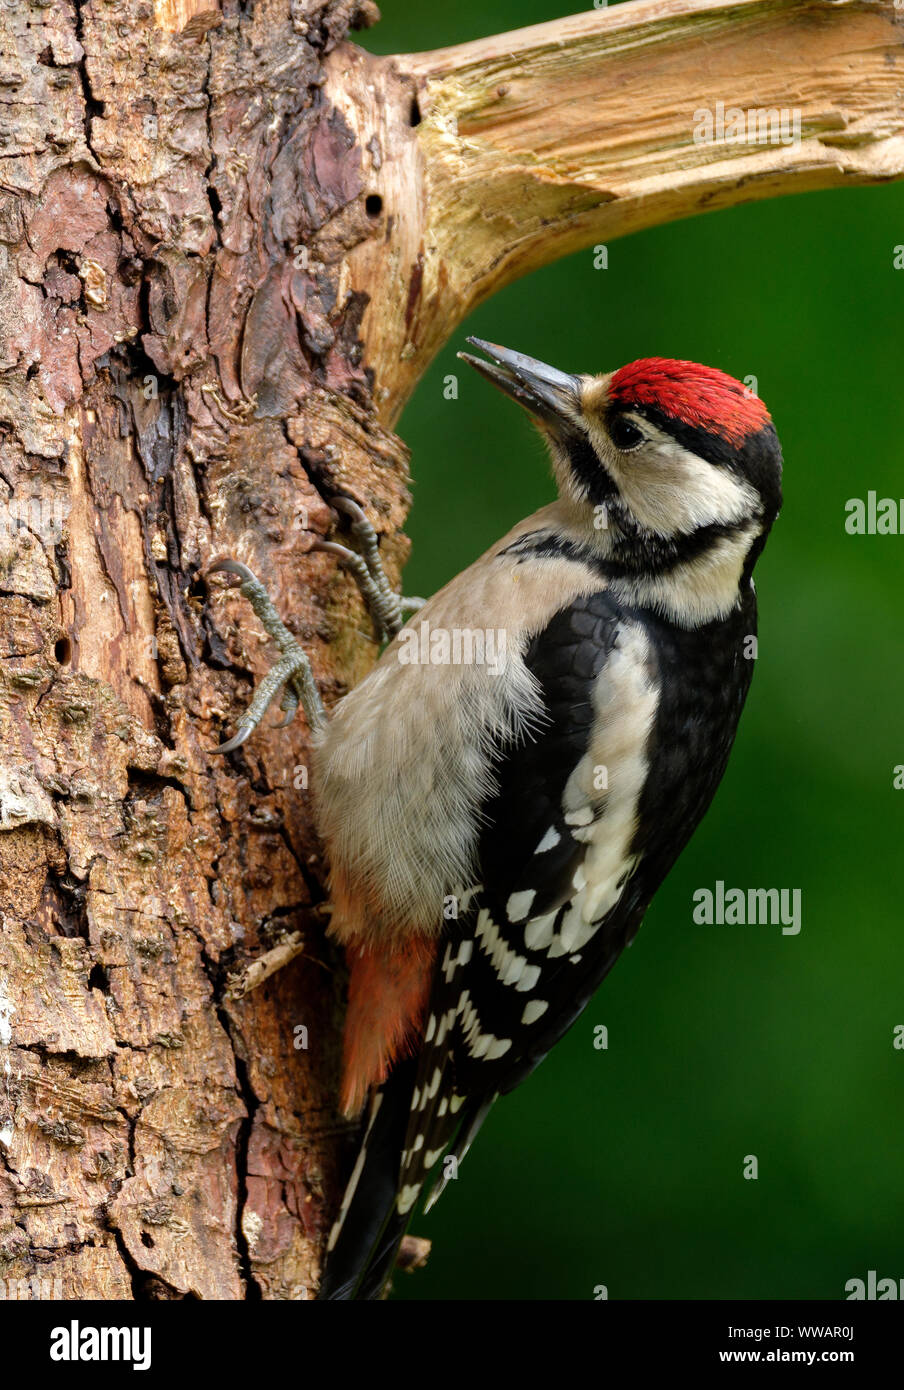 Closeup of Great spotted woodpecker Dendrocopos major female climbing on a tree trunk with green background Stock Photo